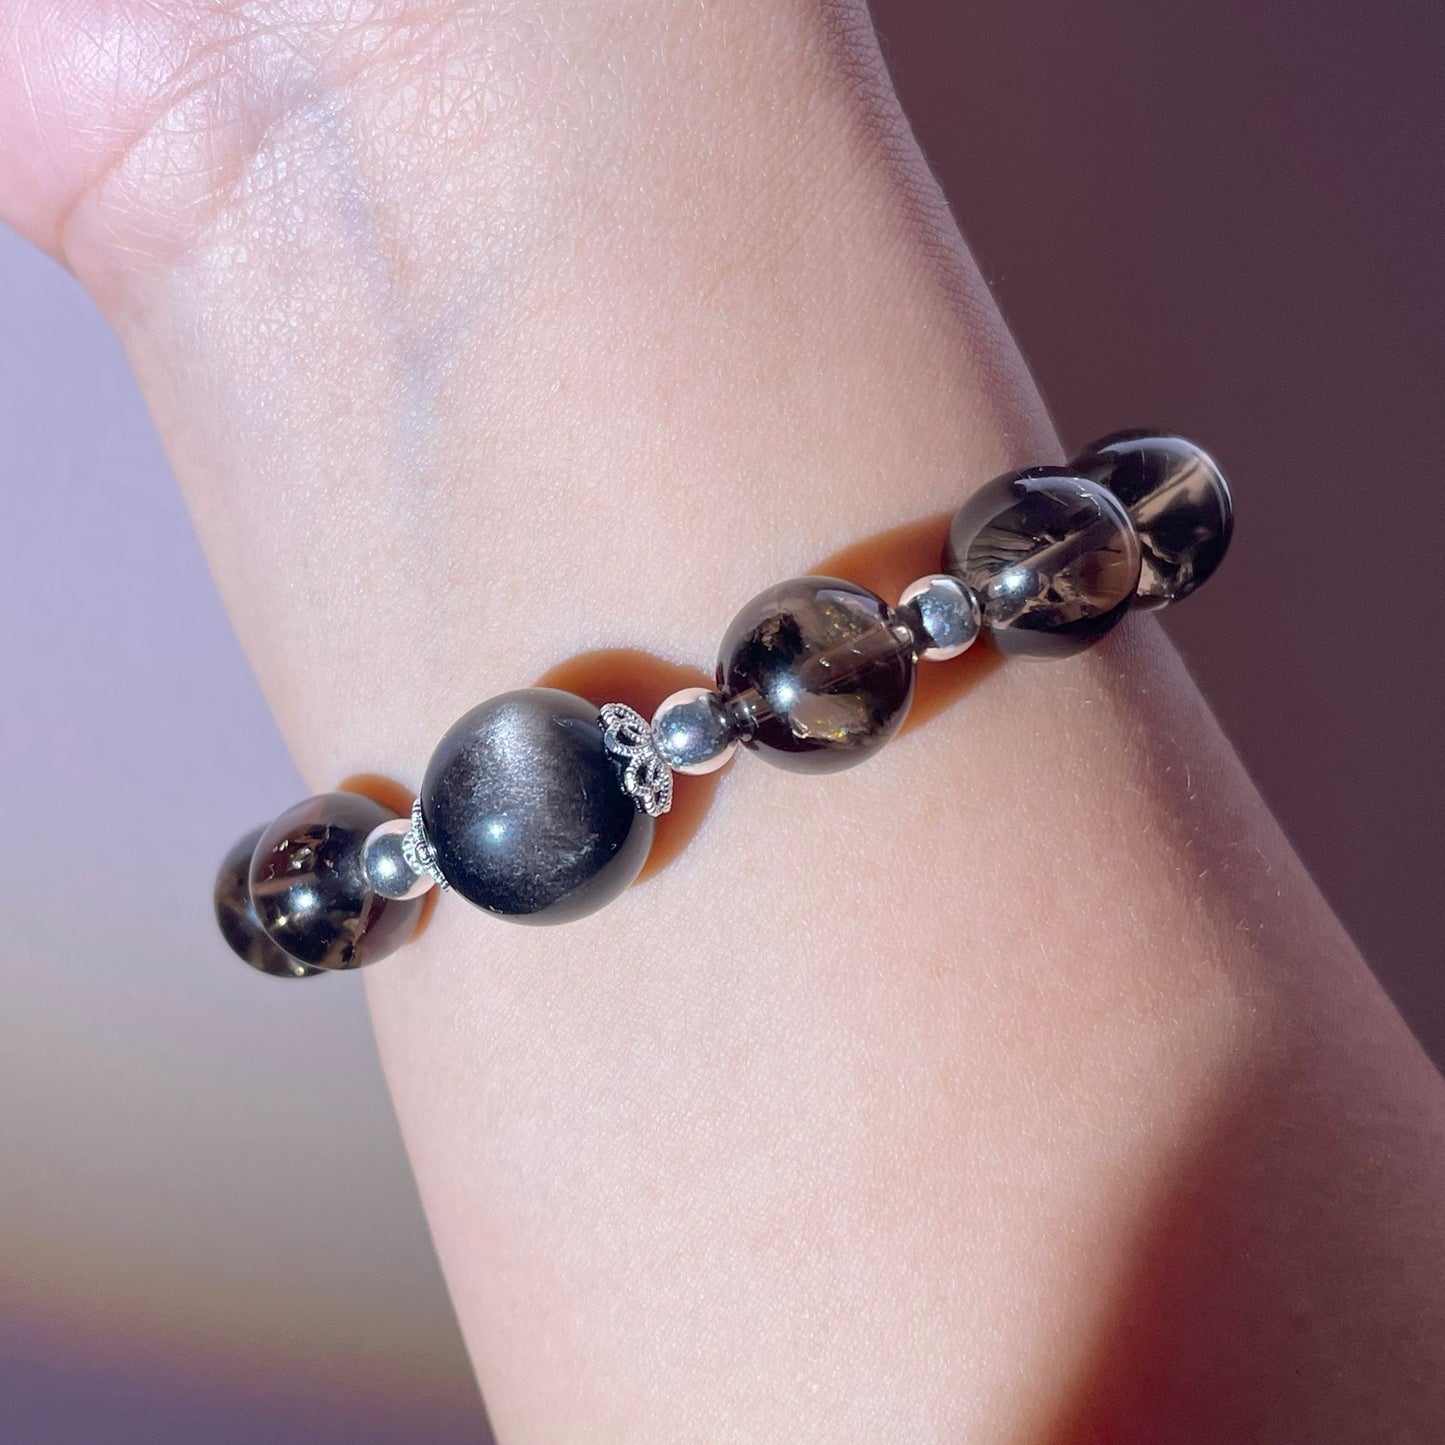 Natural high quality Smoky Quartz+Sliver Obsidian bracelet, with S925 silver accessories